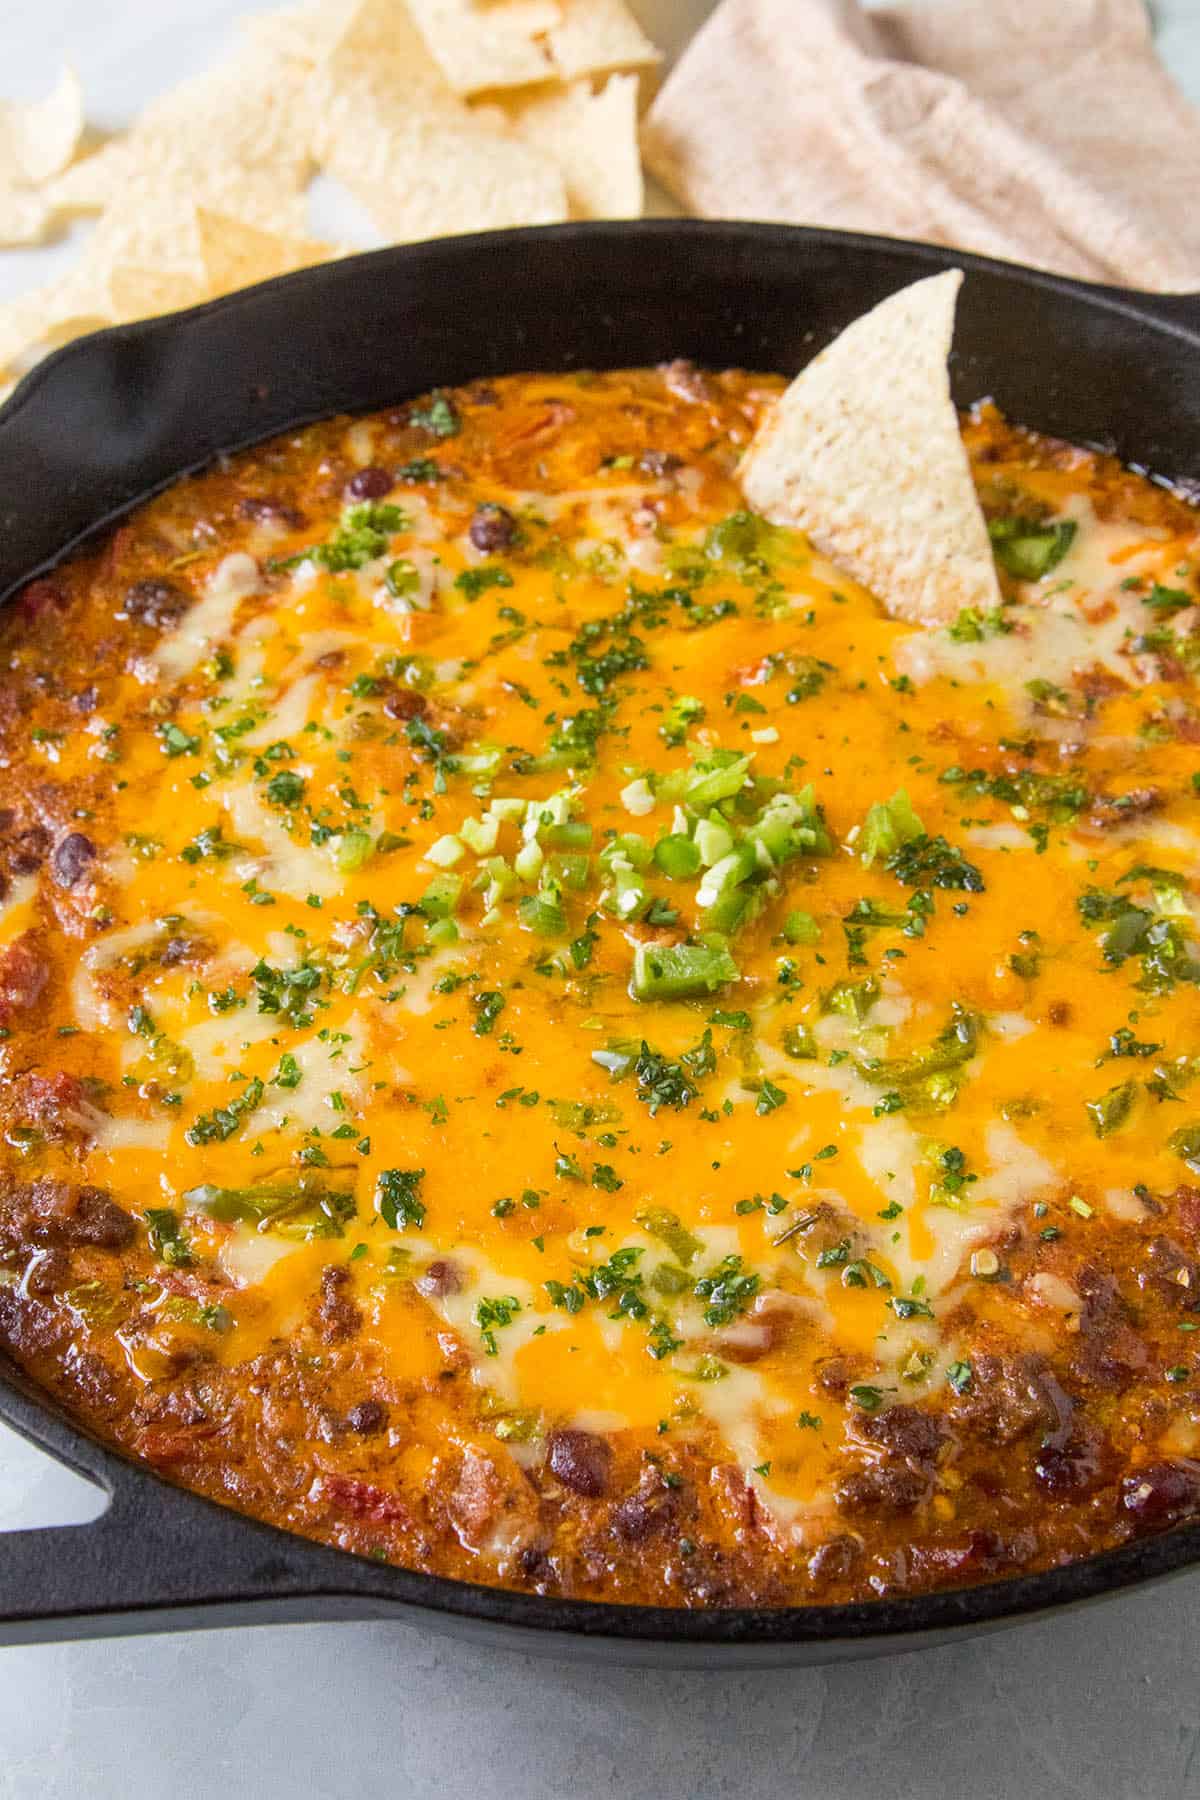 Chili Cheese Dip in a pan, ready to serve